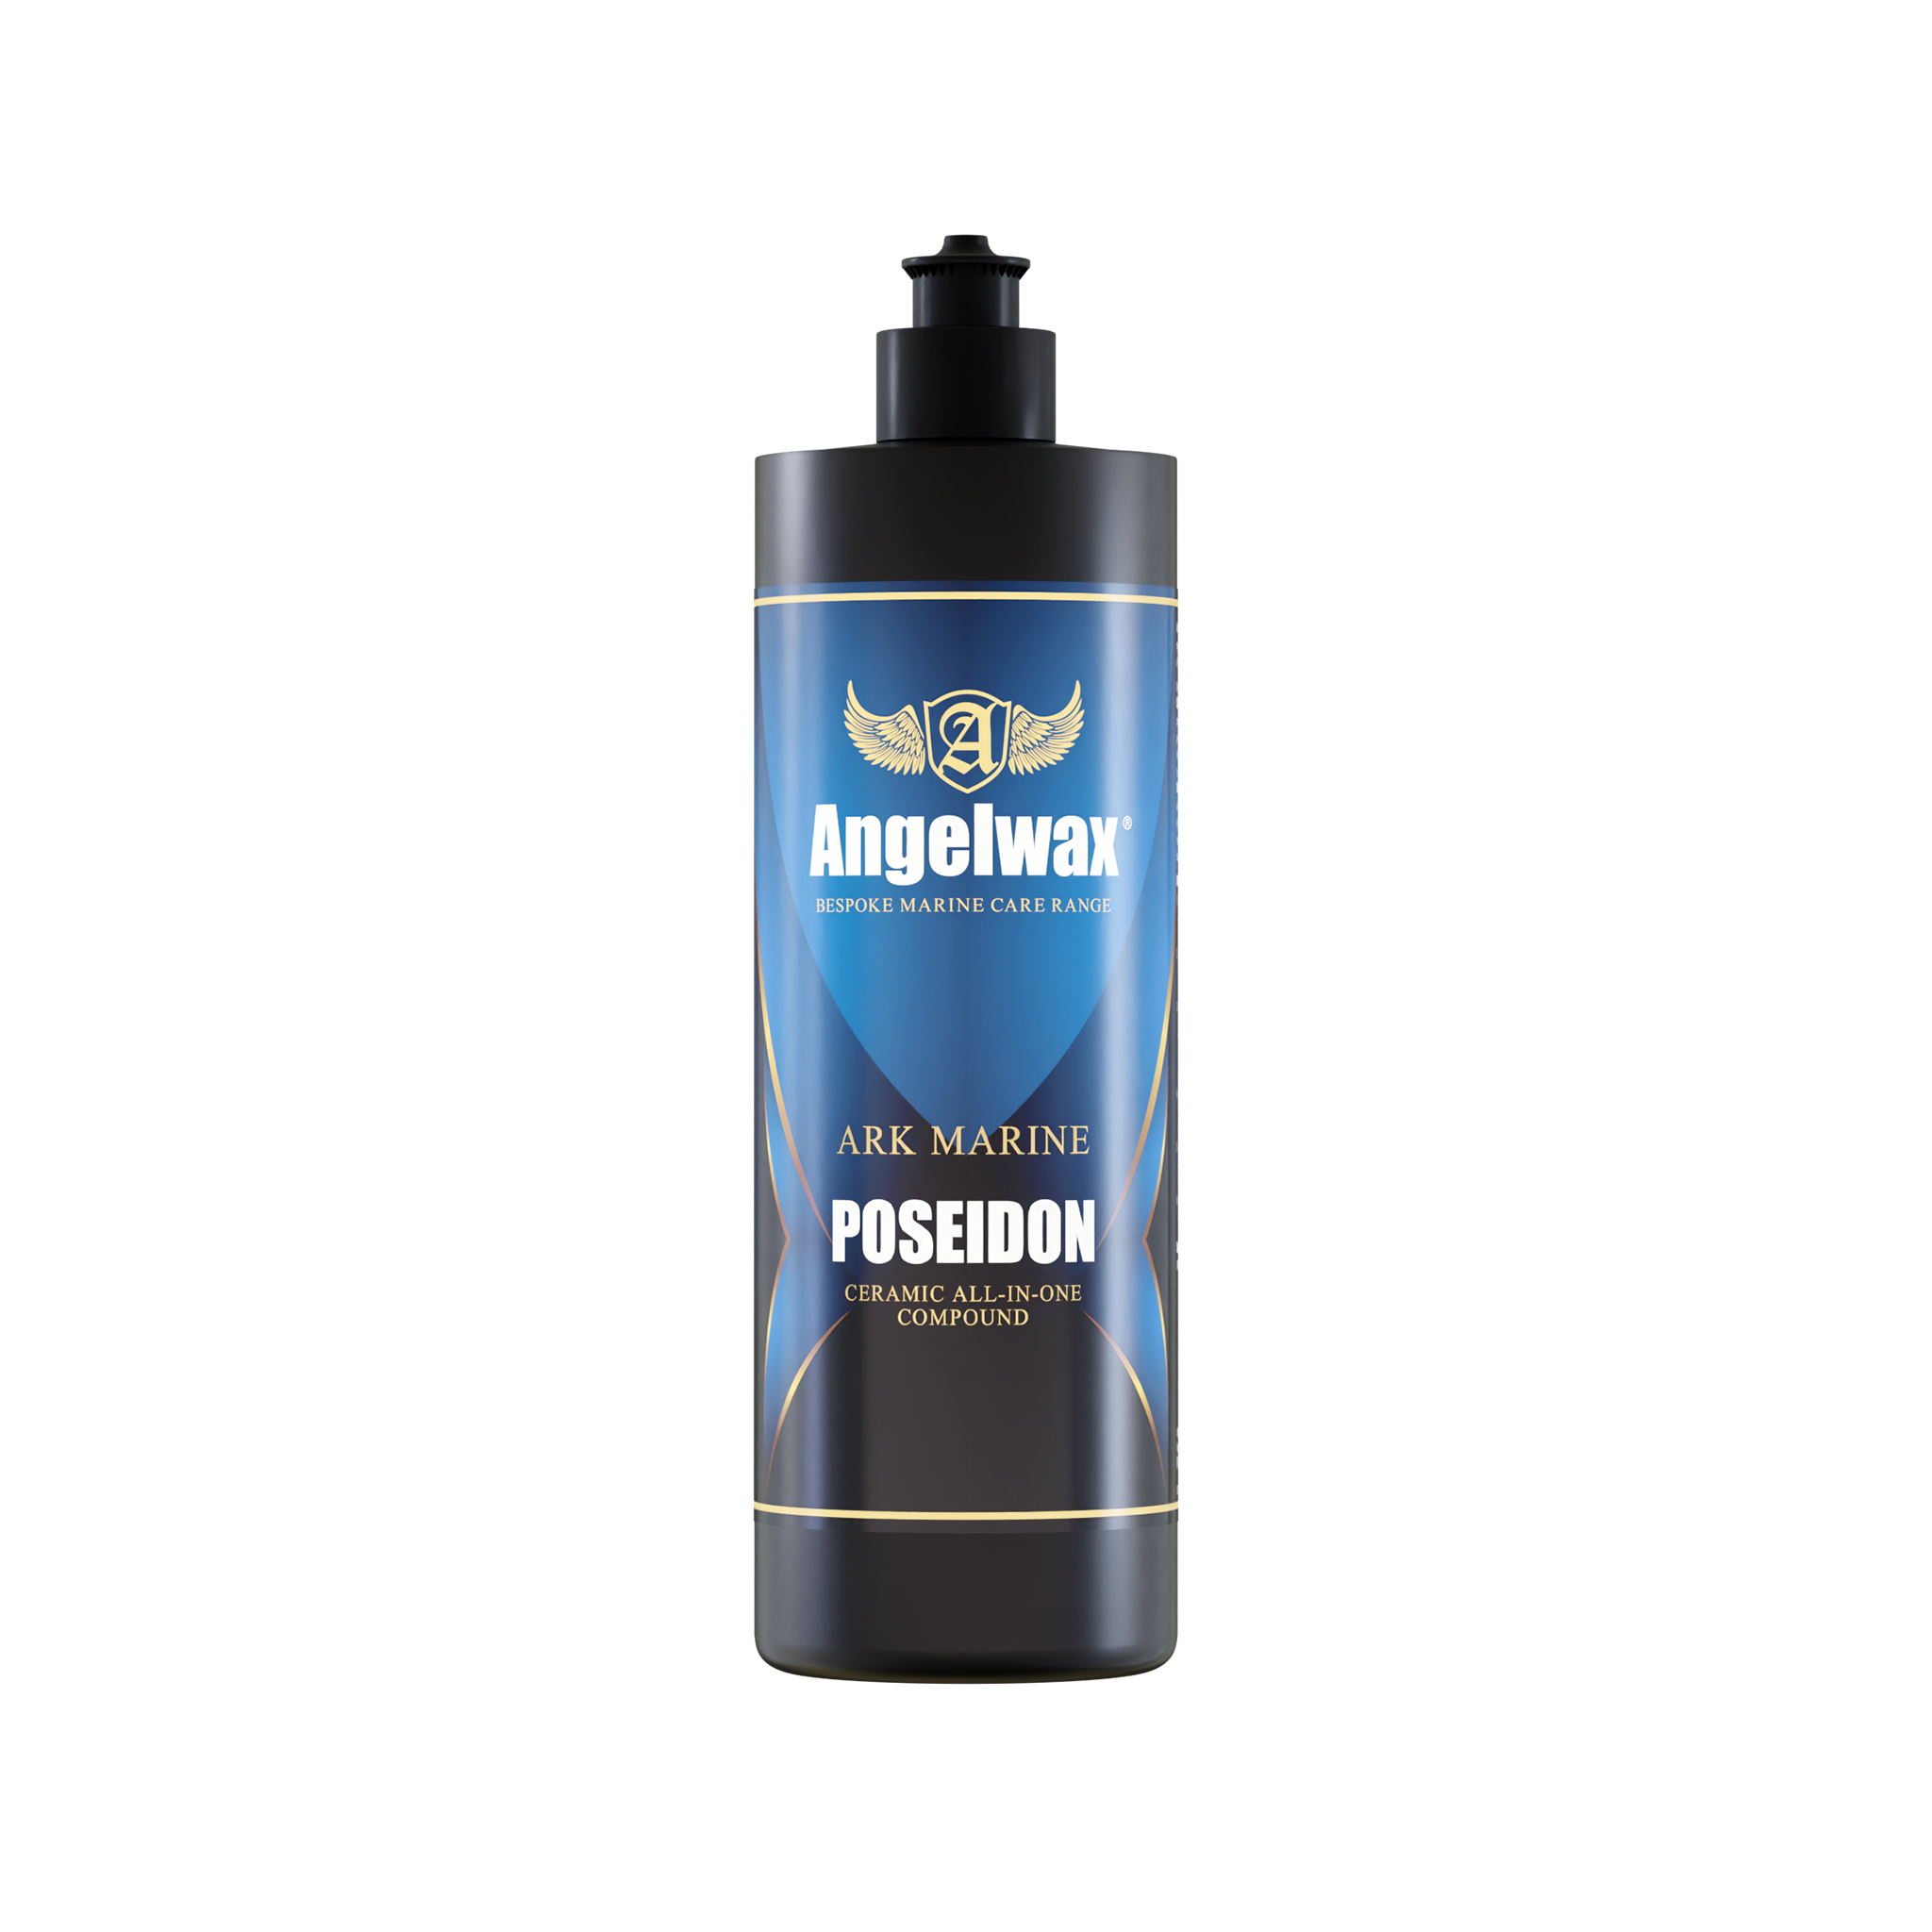 Angelwax ARK MARINE Poseidon (All-In-One Compound)